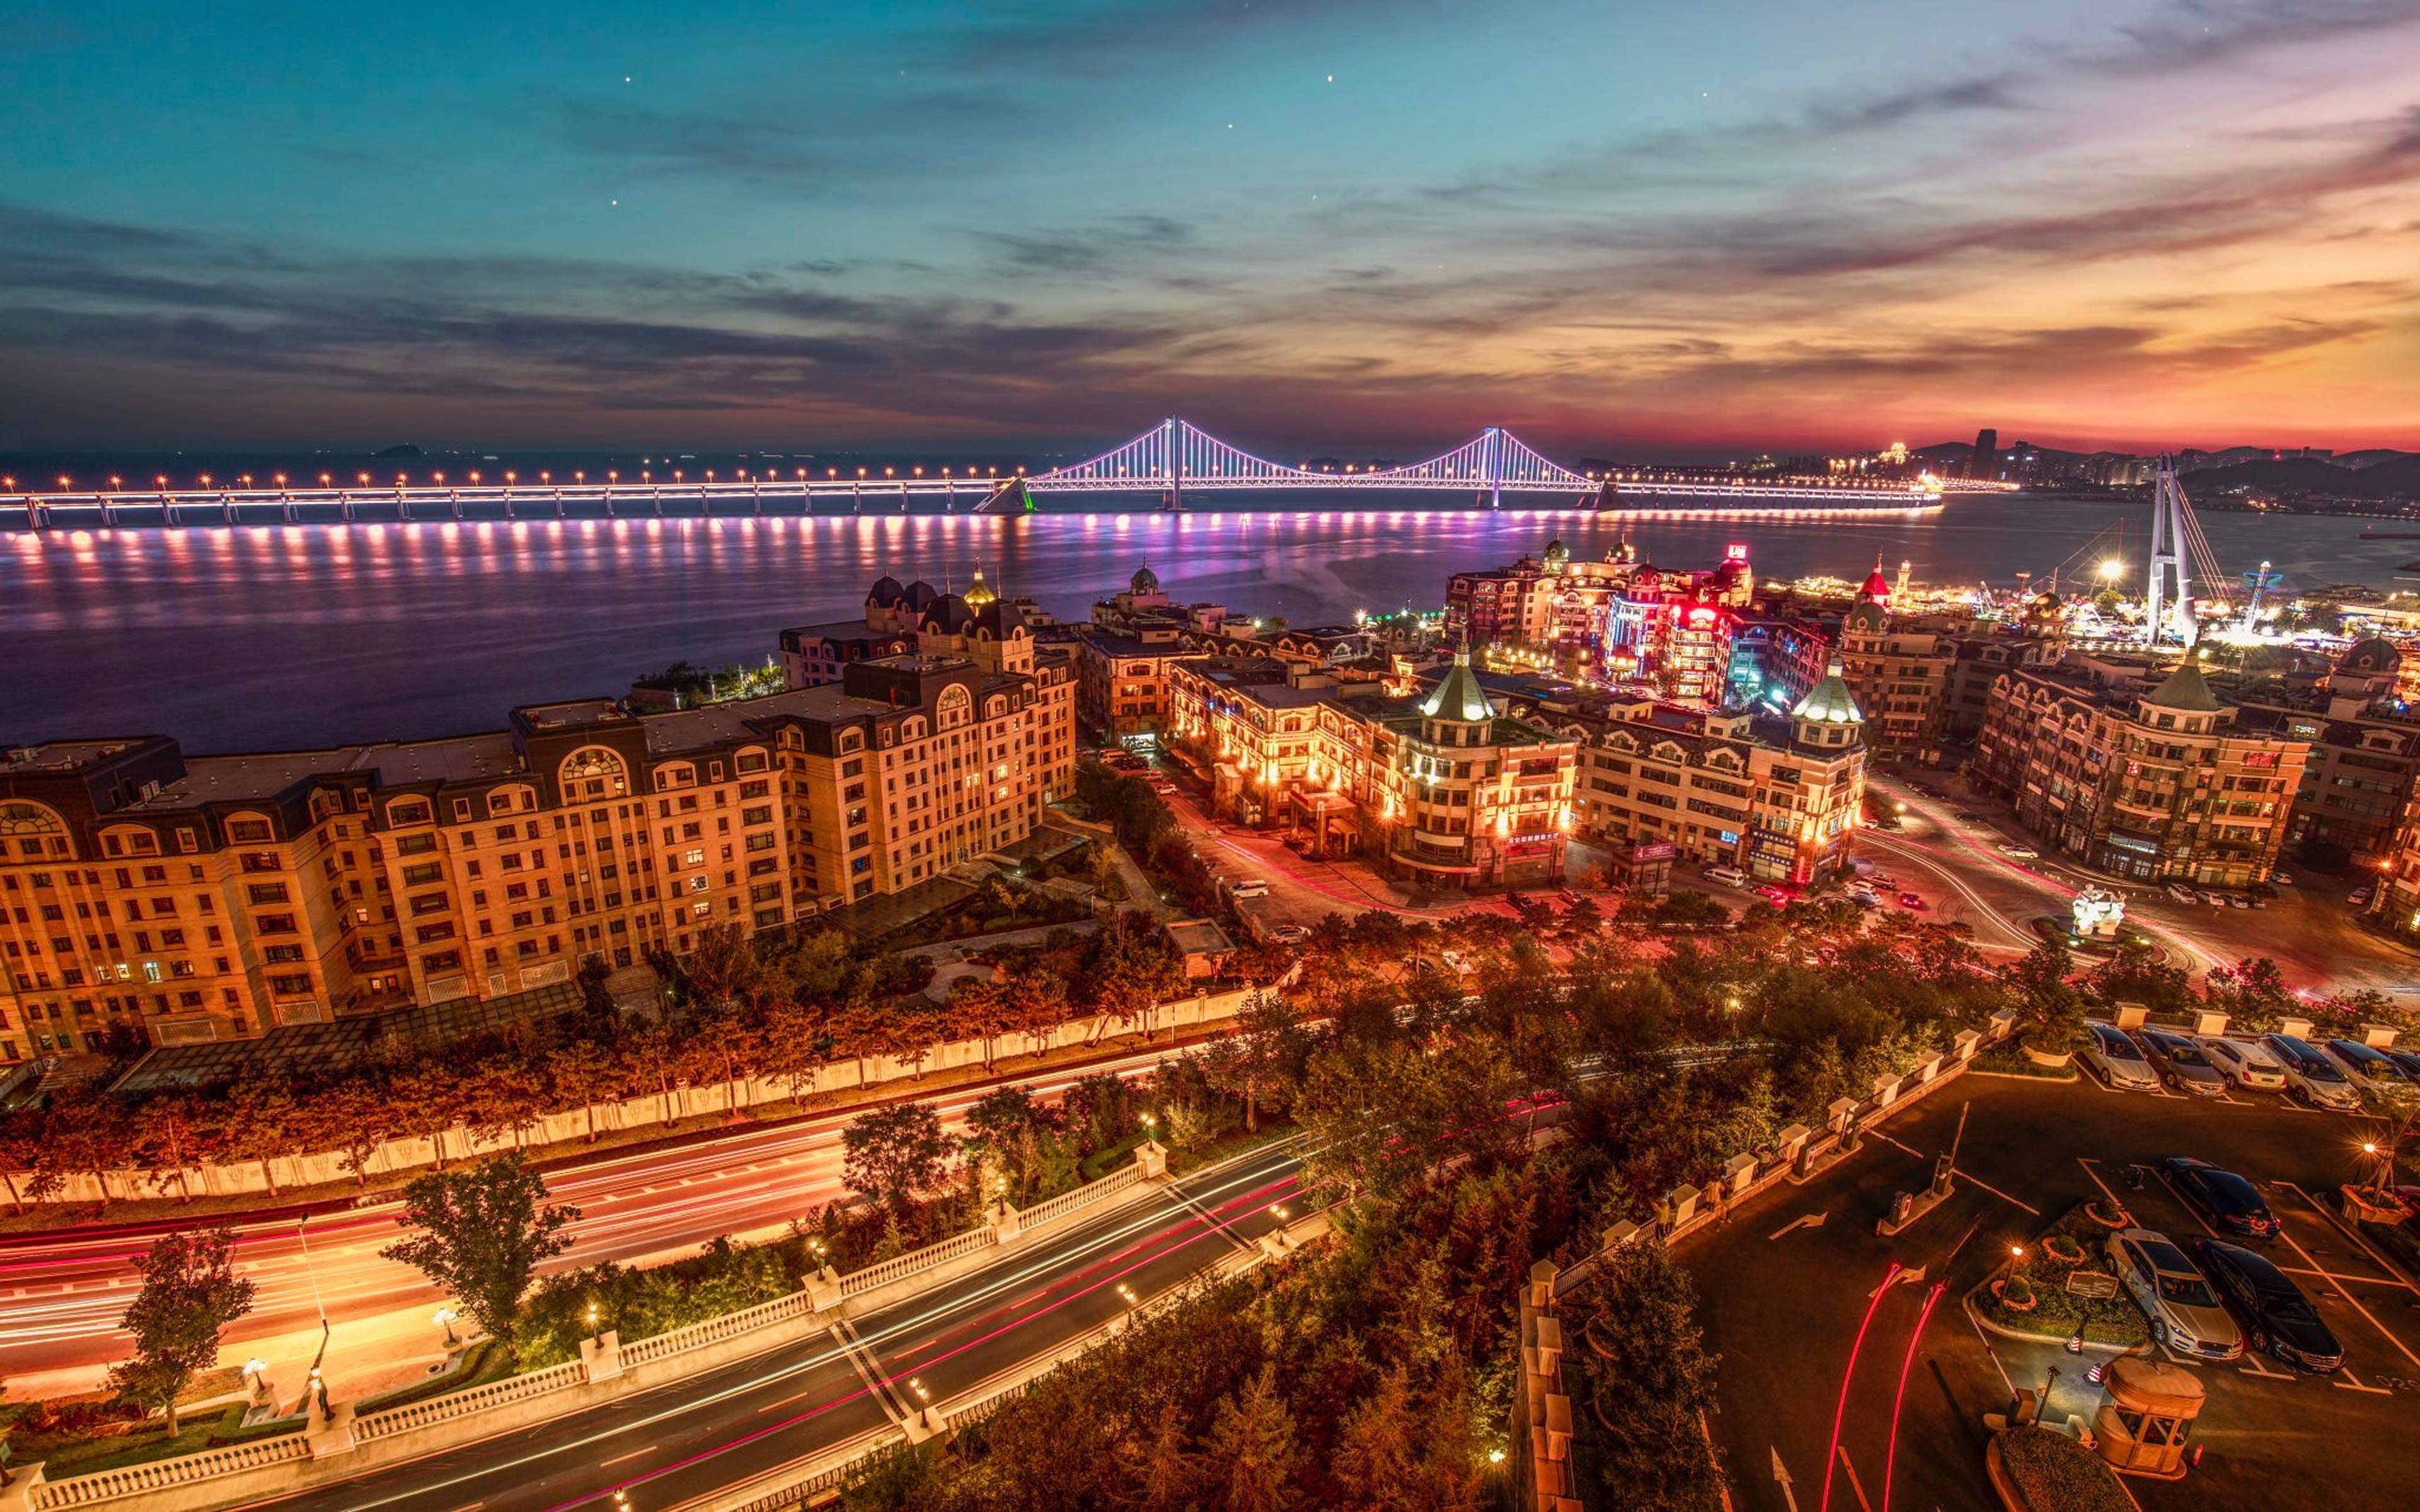 Dalian City In China Modern Port City On The Liaodong Peninsula At The